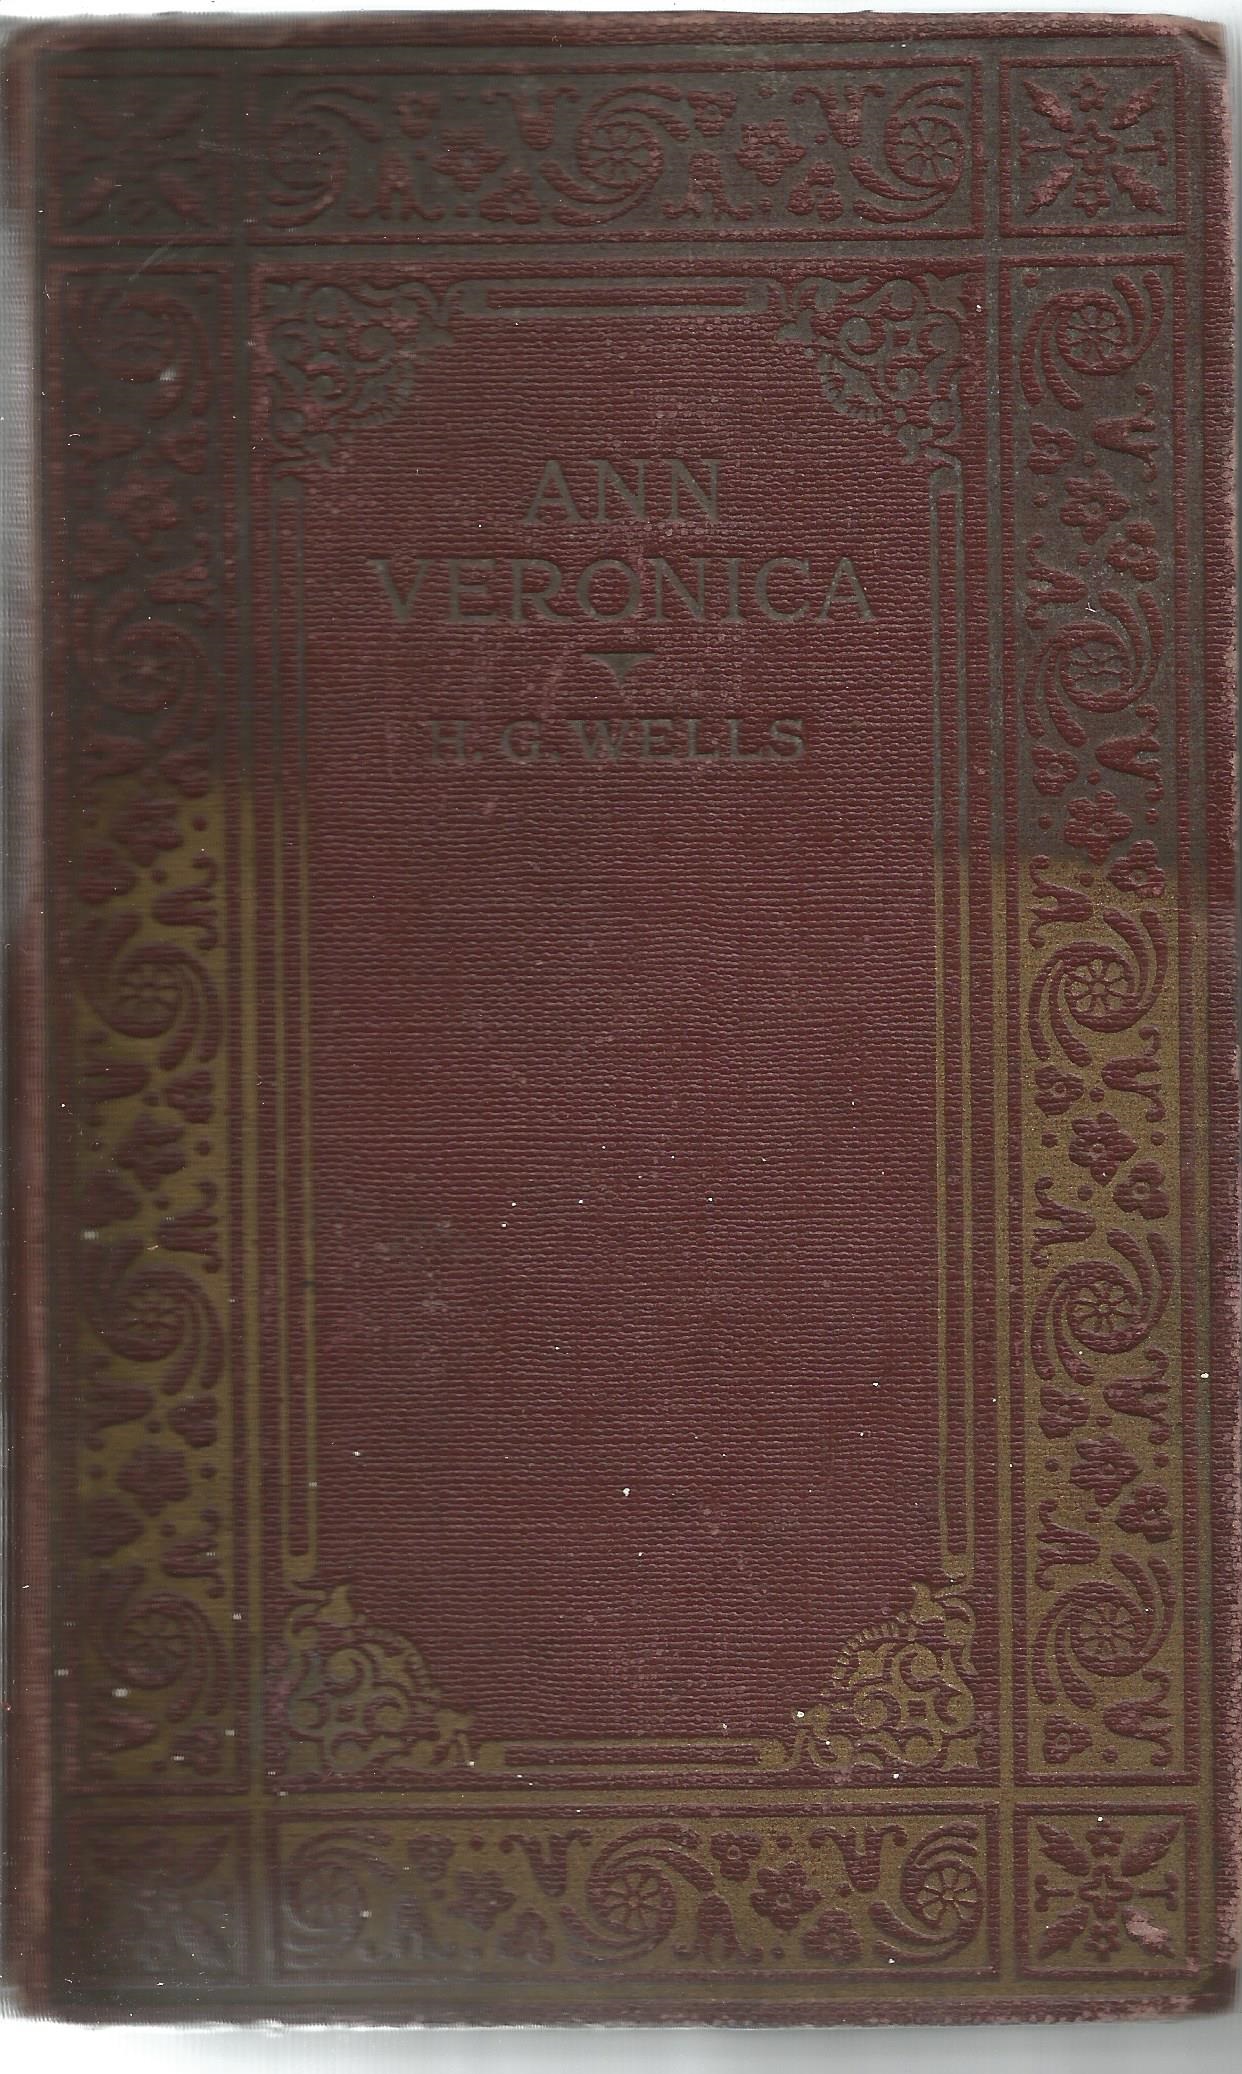 Ann Veronica by H G Wells. Unsigned hardback book with no dust jacket , 252 pages printed in